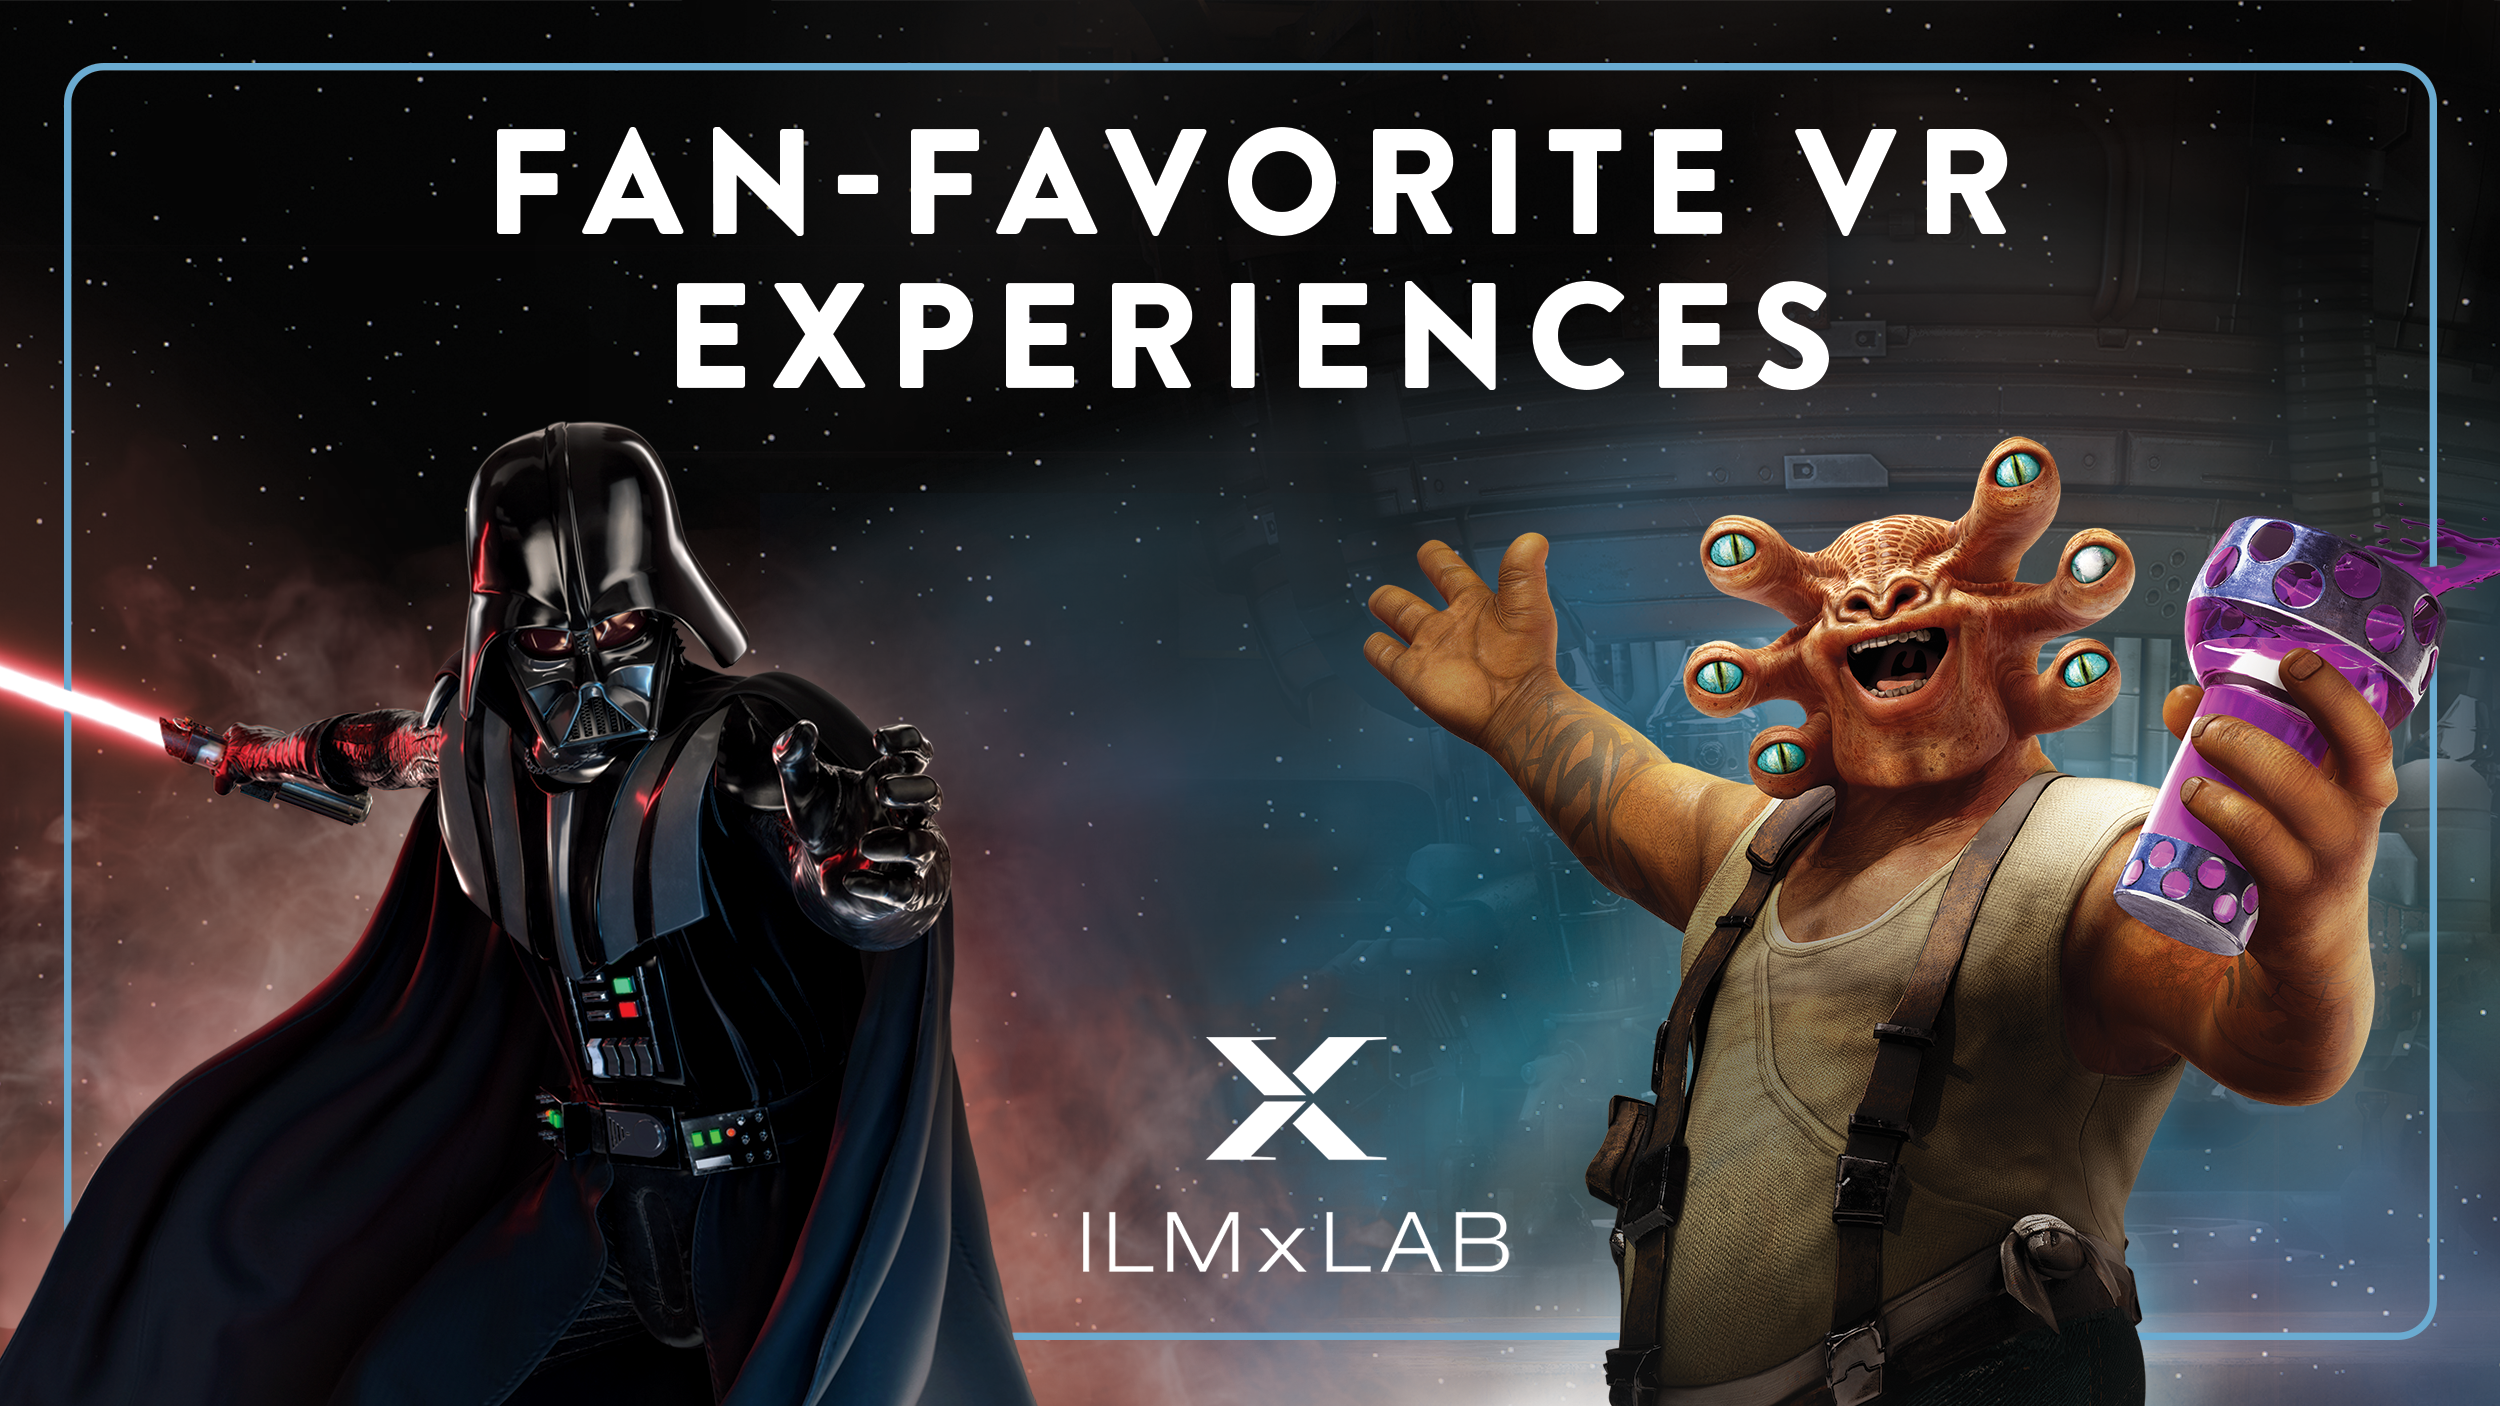 Celebrate the Holidays with Fan-Favorite VR Experiences from ILMxLAB!